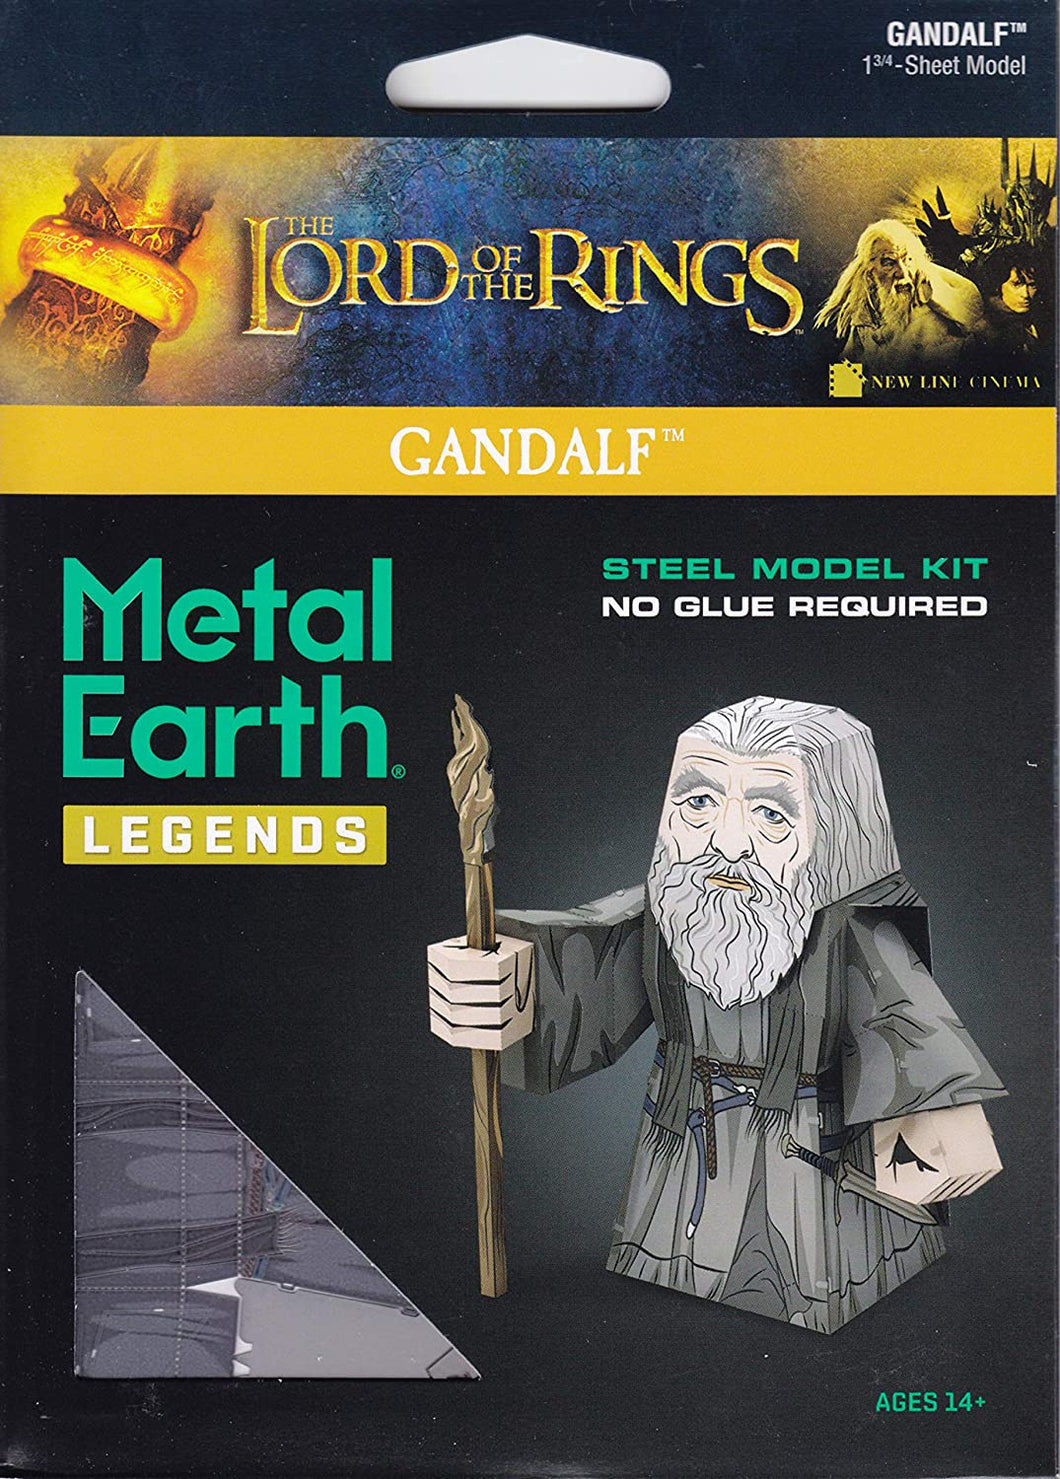 Gandalf - COLOR Lord of the Rings